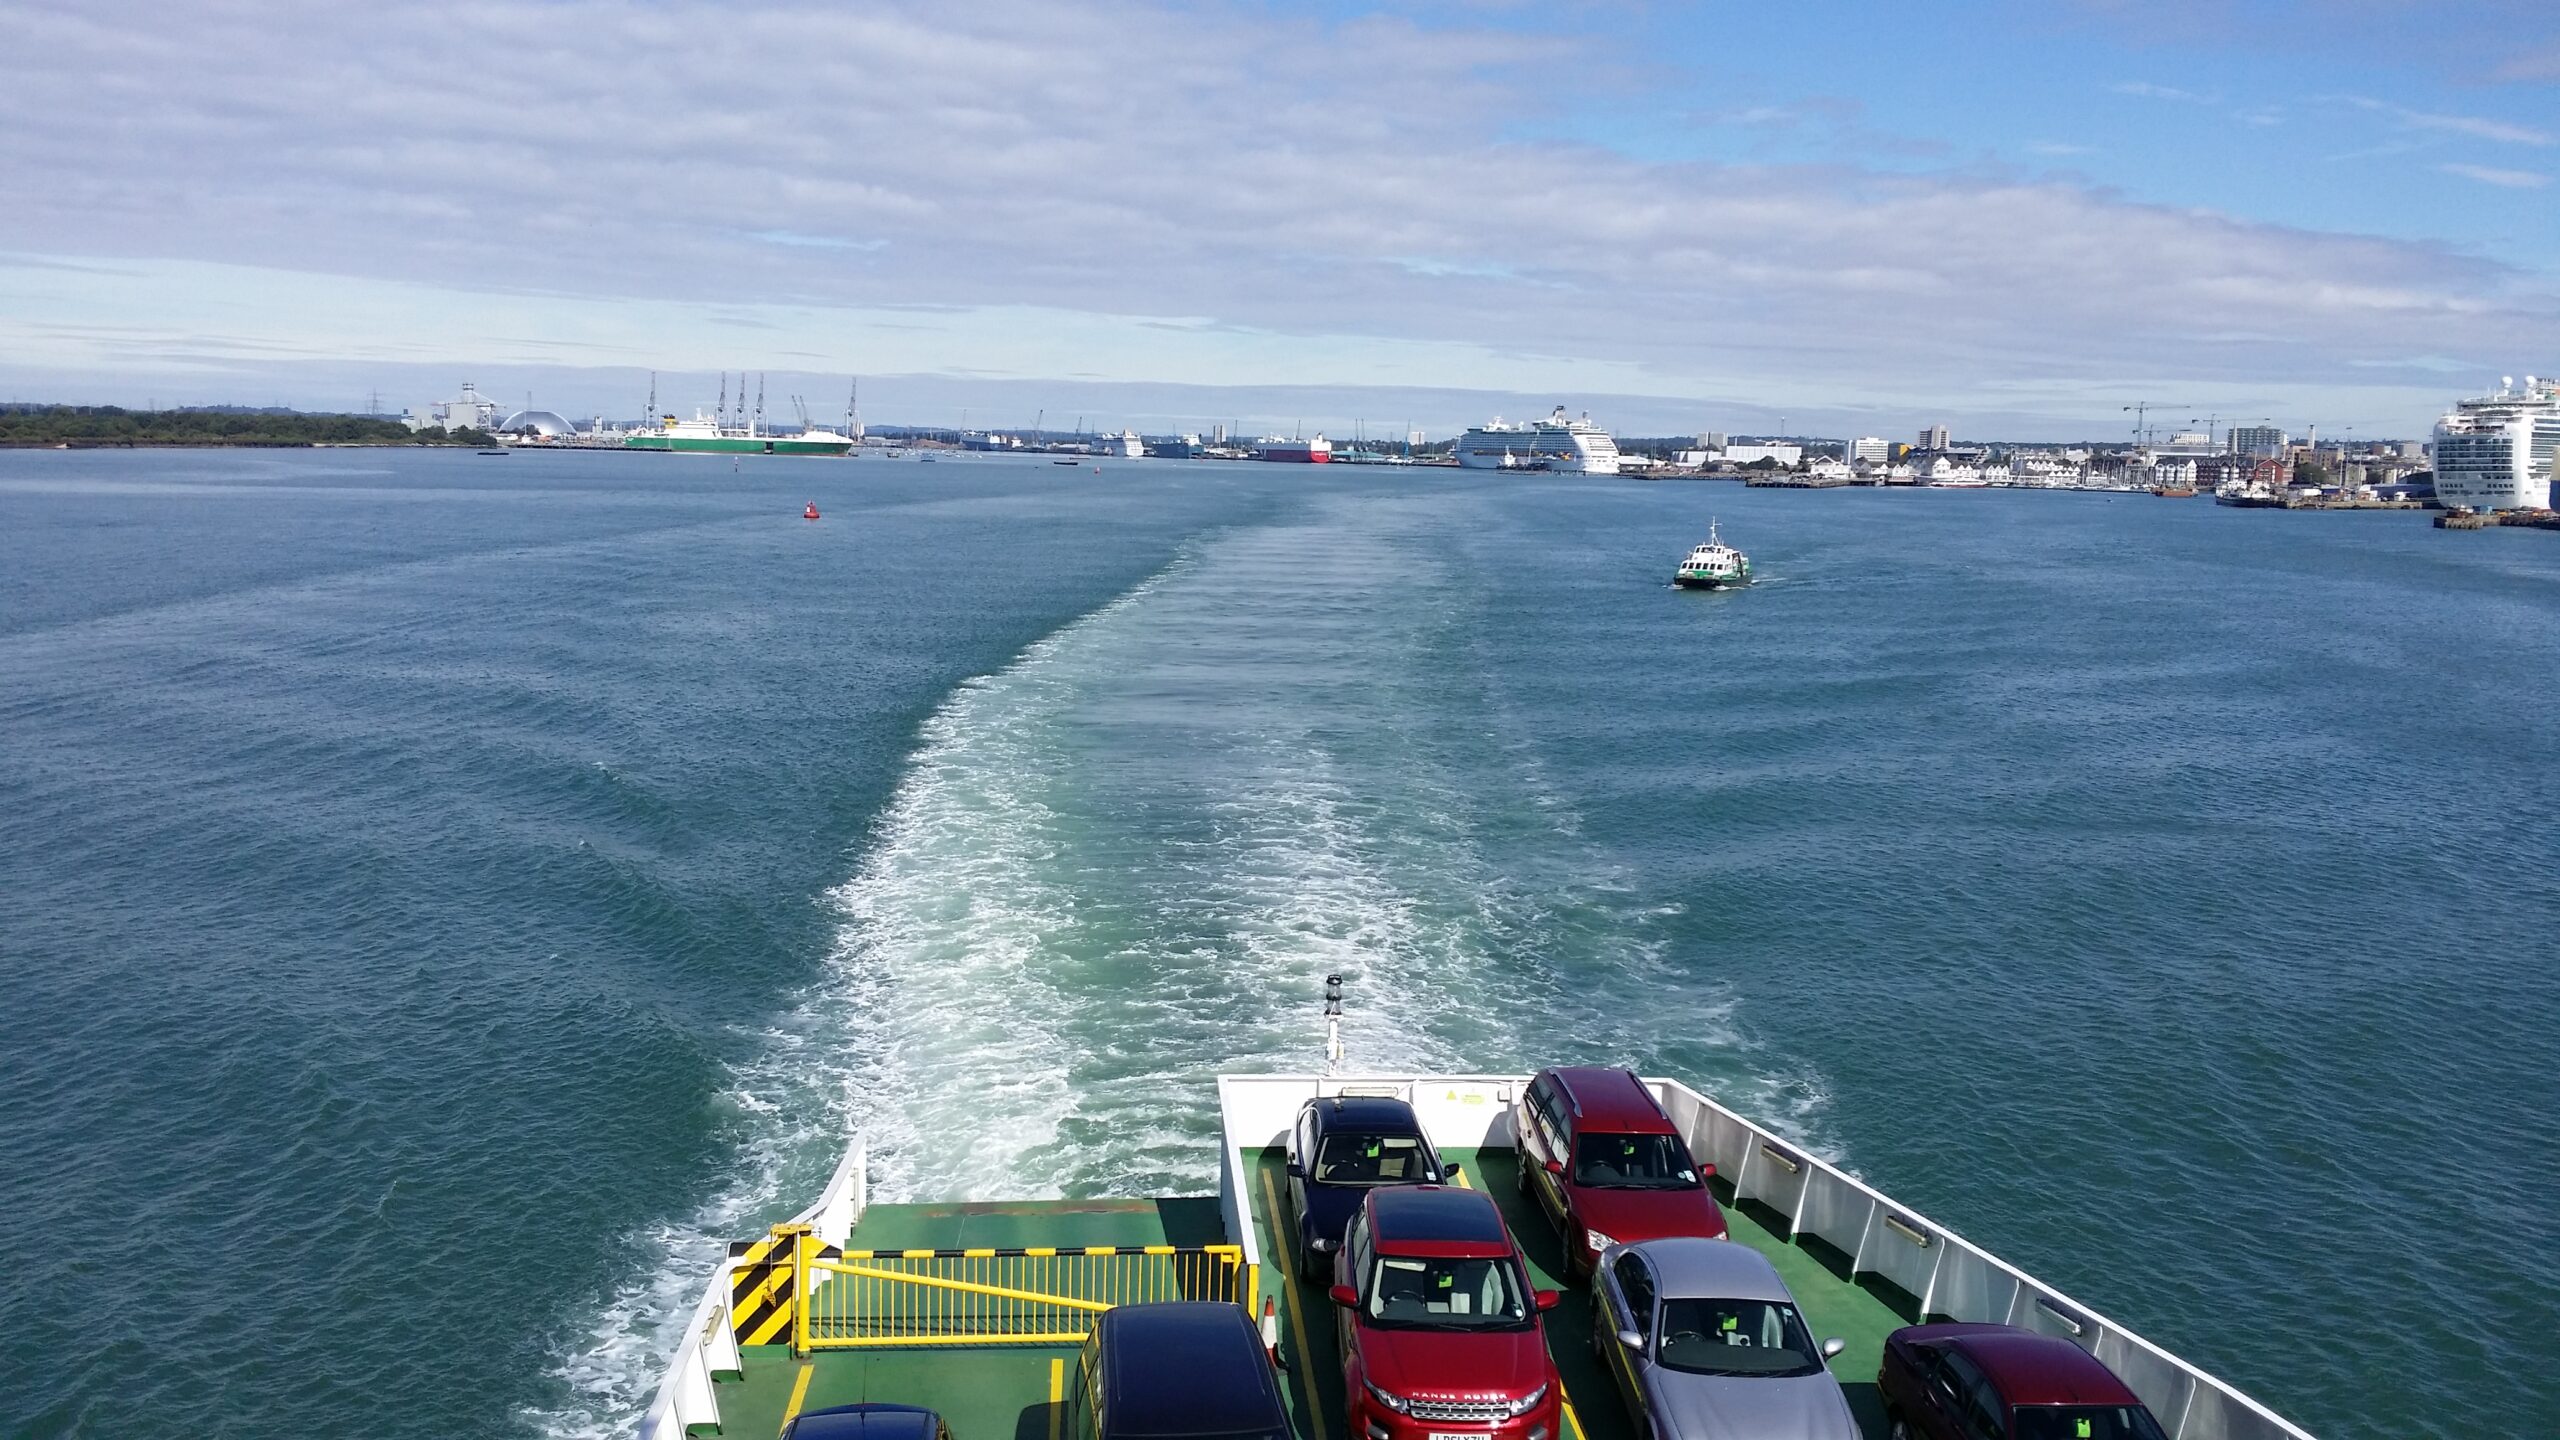 Red funnel ferry